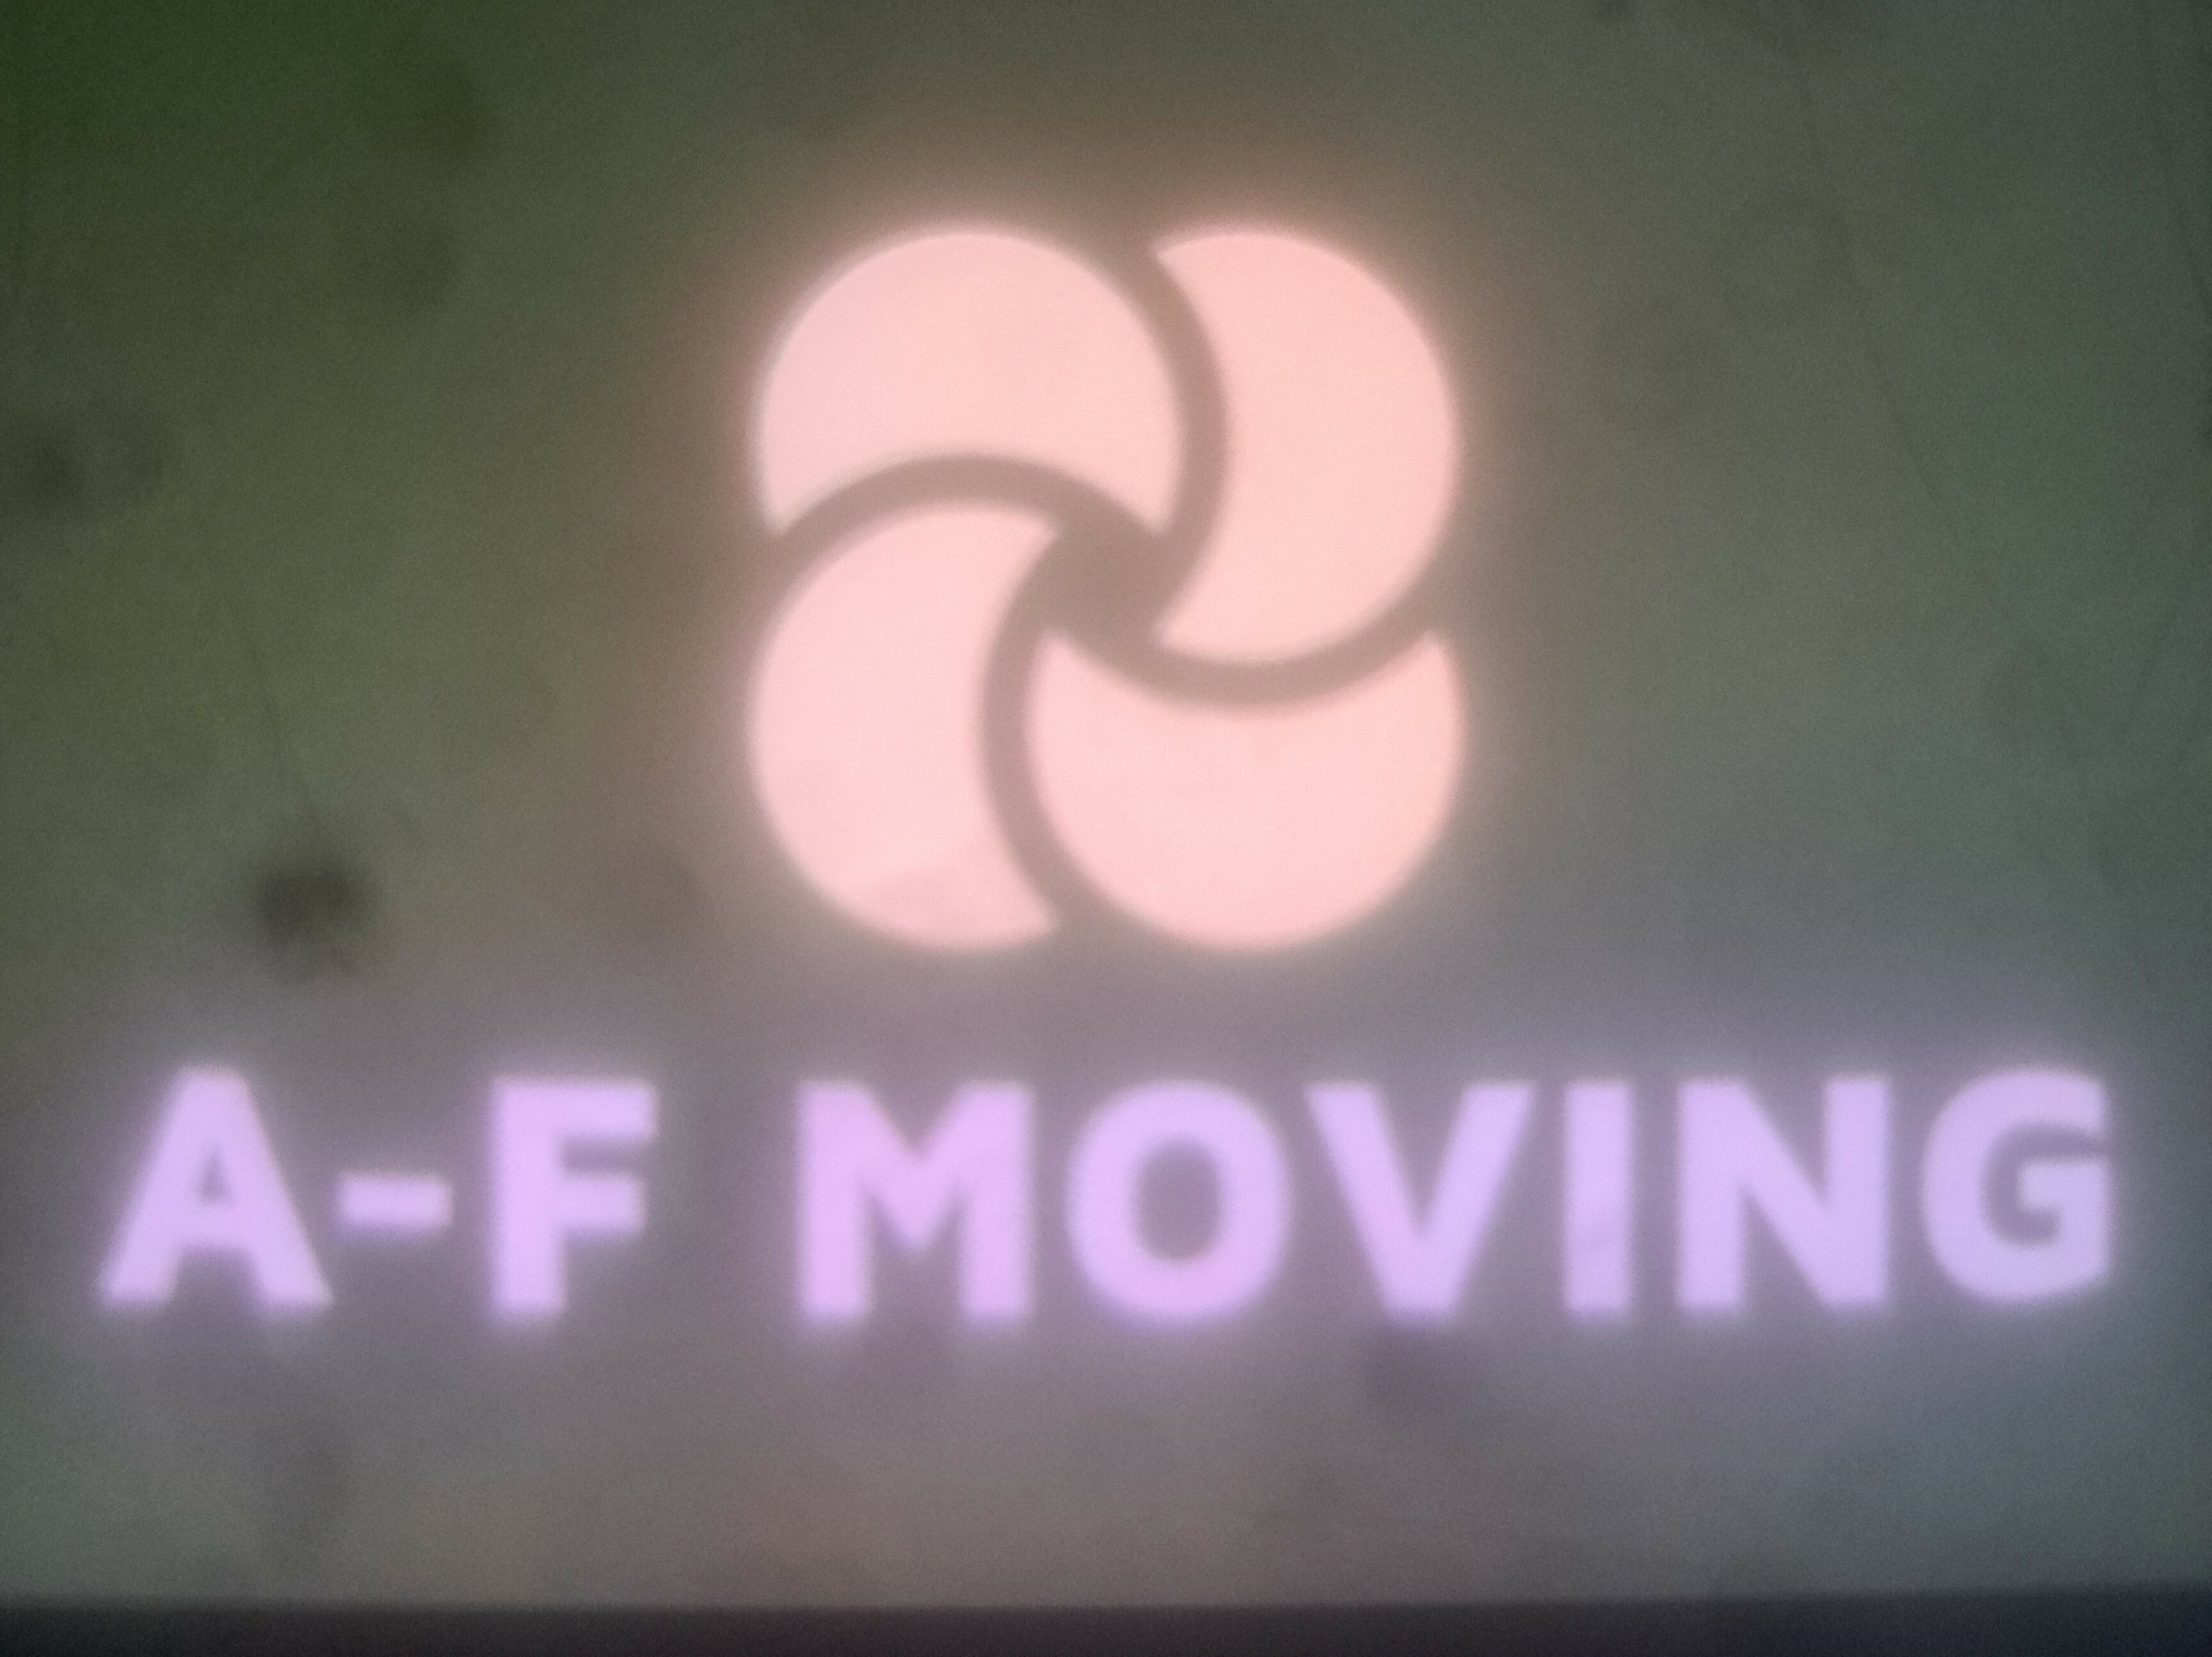 A/F Moving's logo